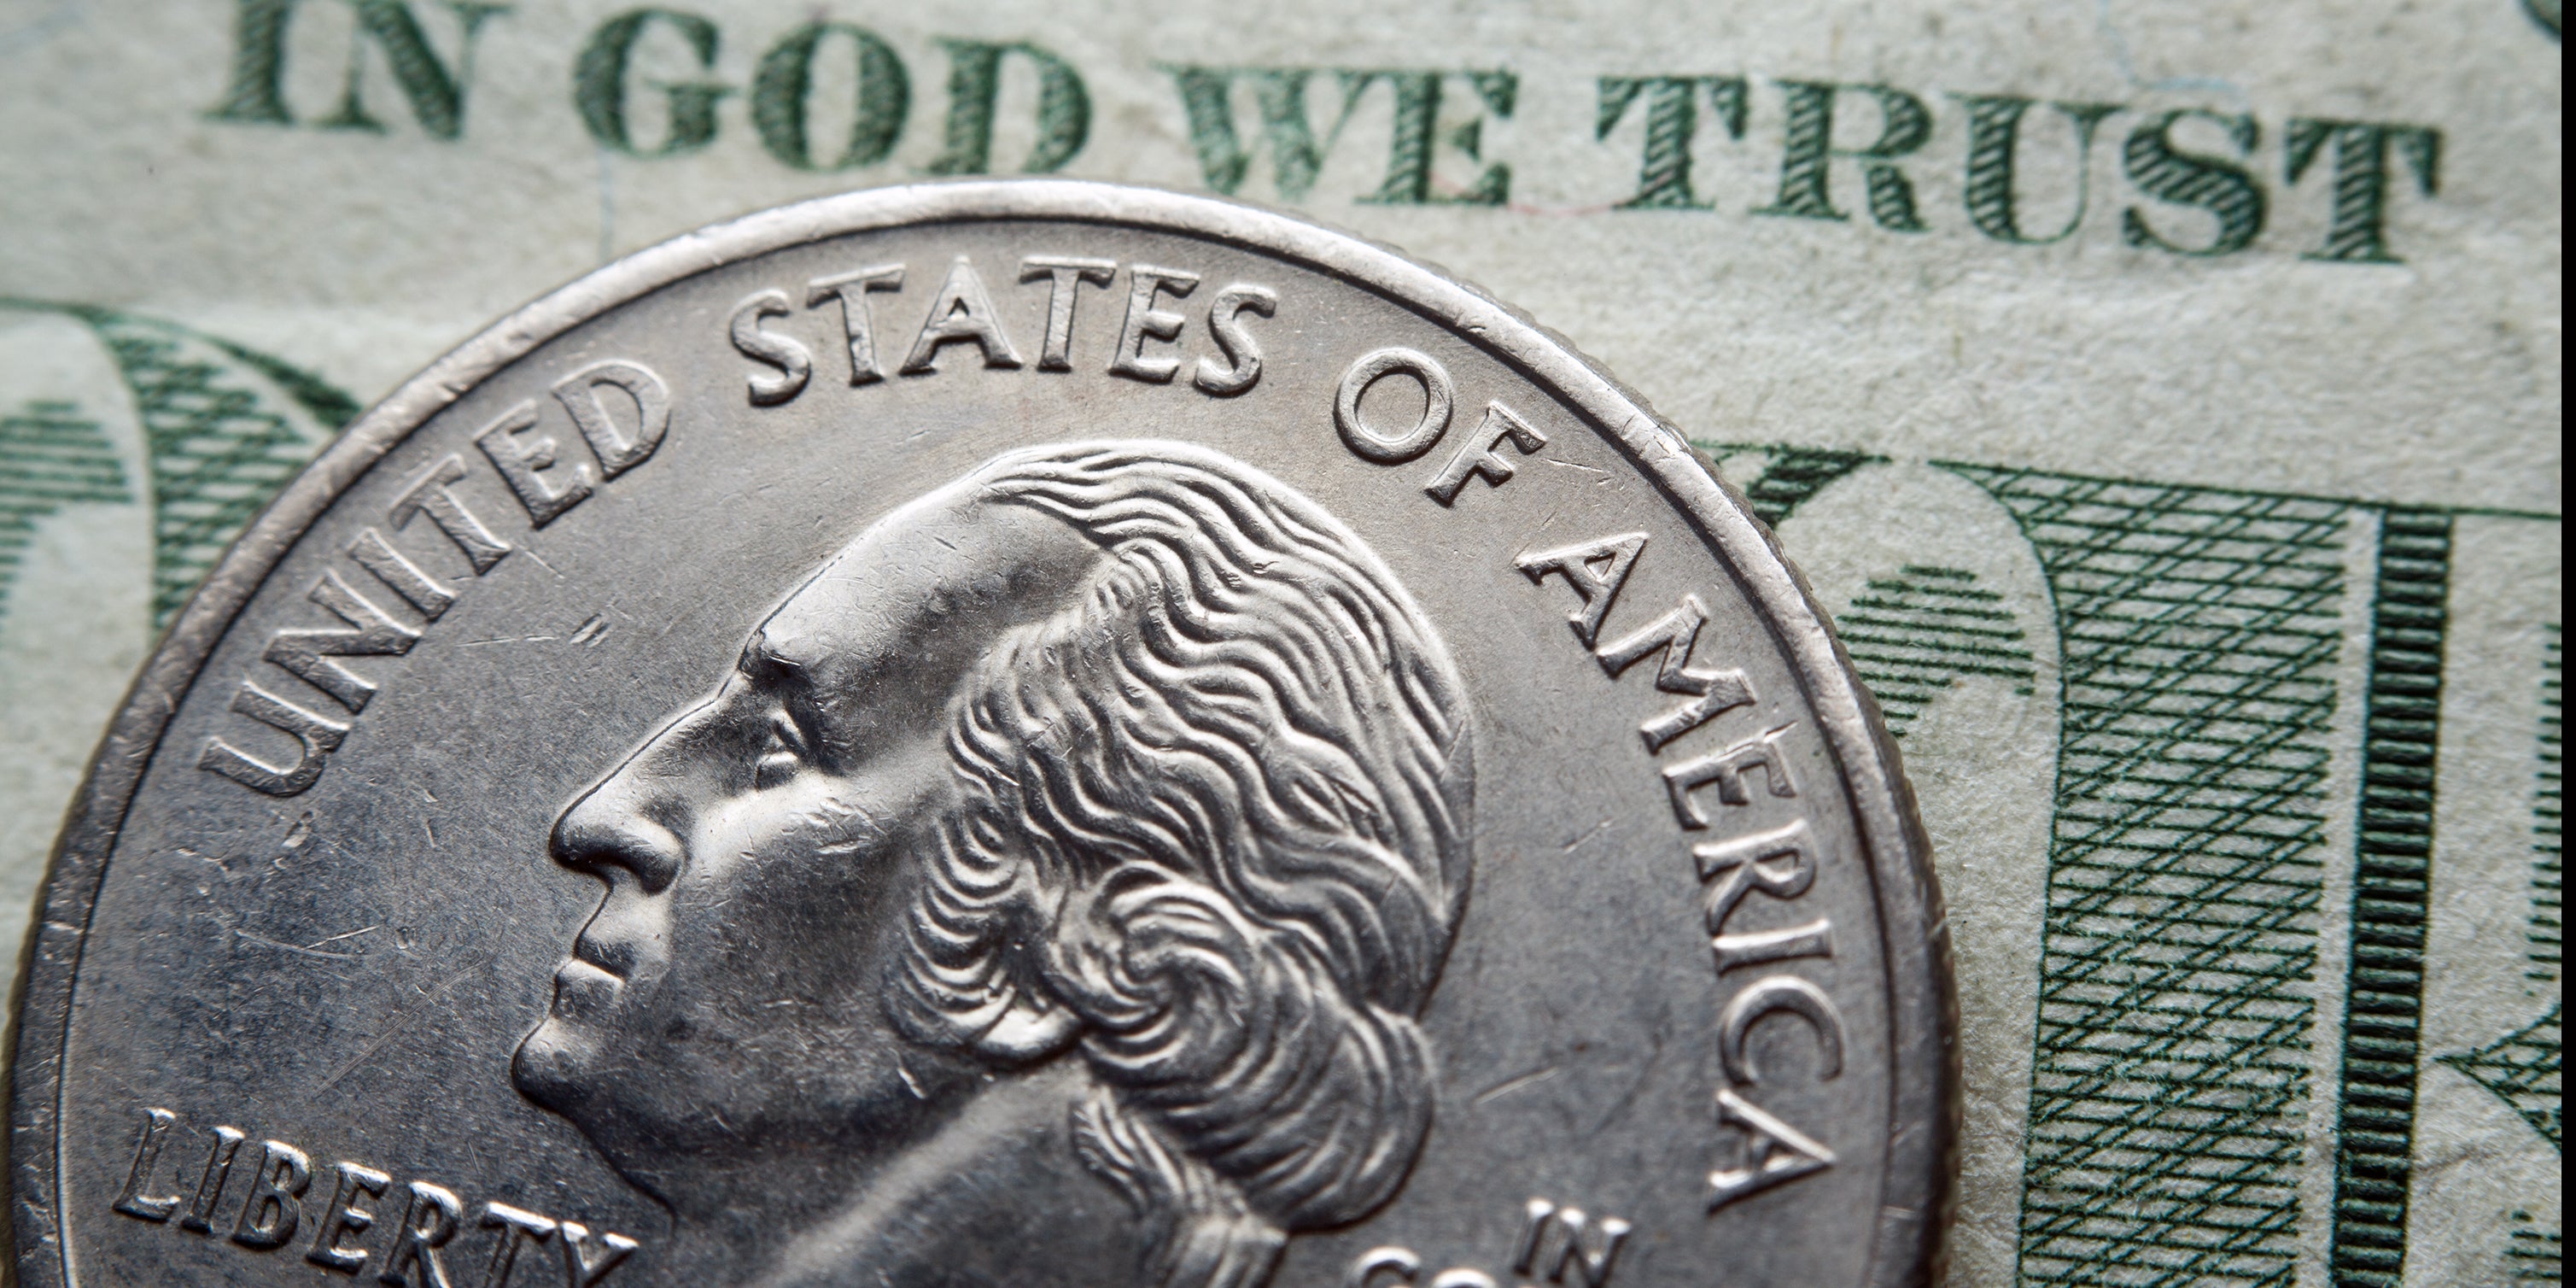  'In God we trust' display may be required in Pa. schools (<a href=